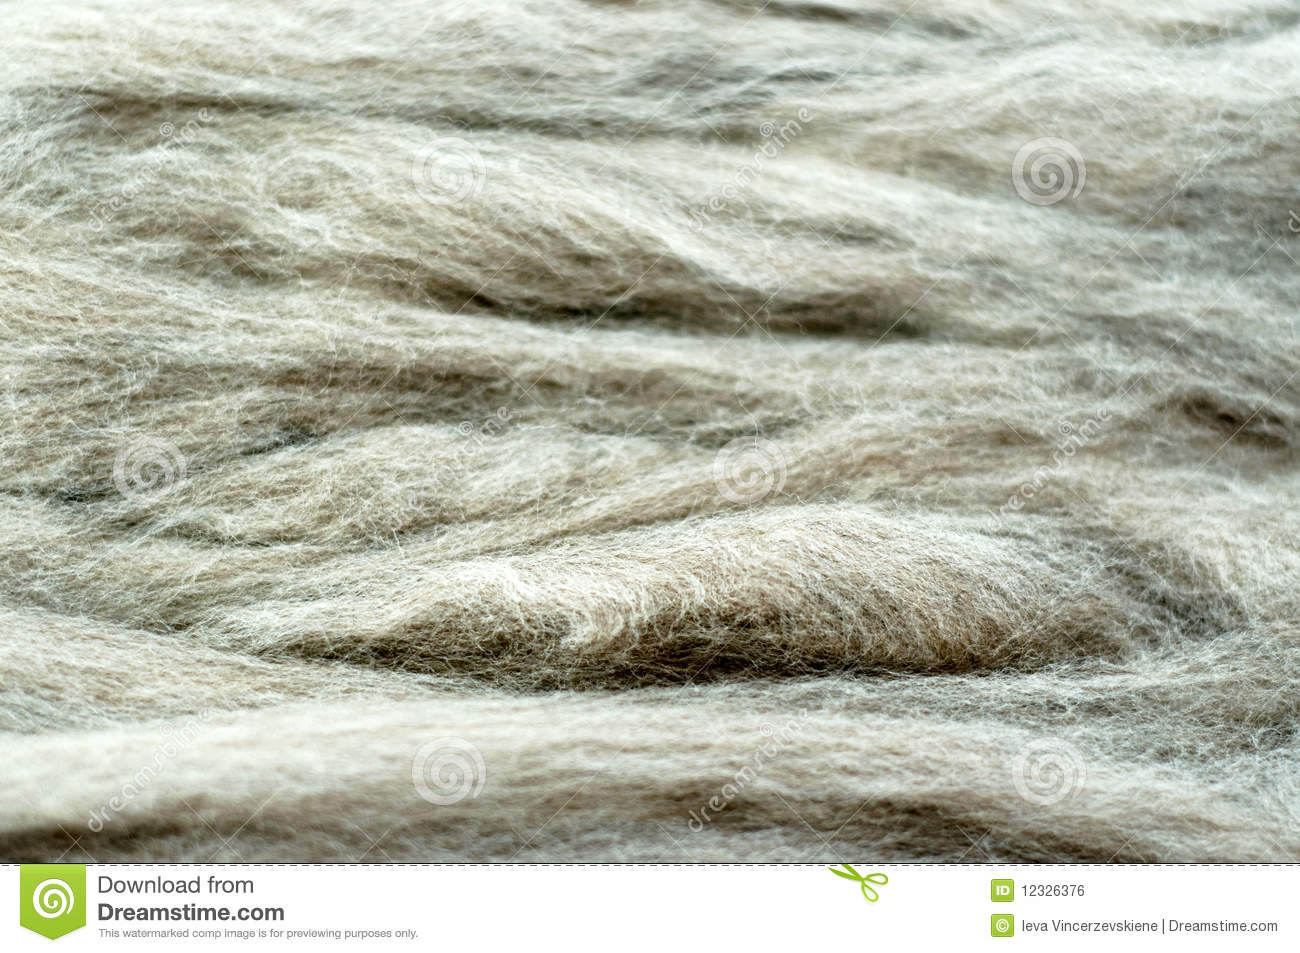 Raw Wool Stock Photos, Images, & Pictures.